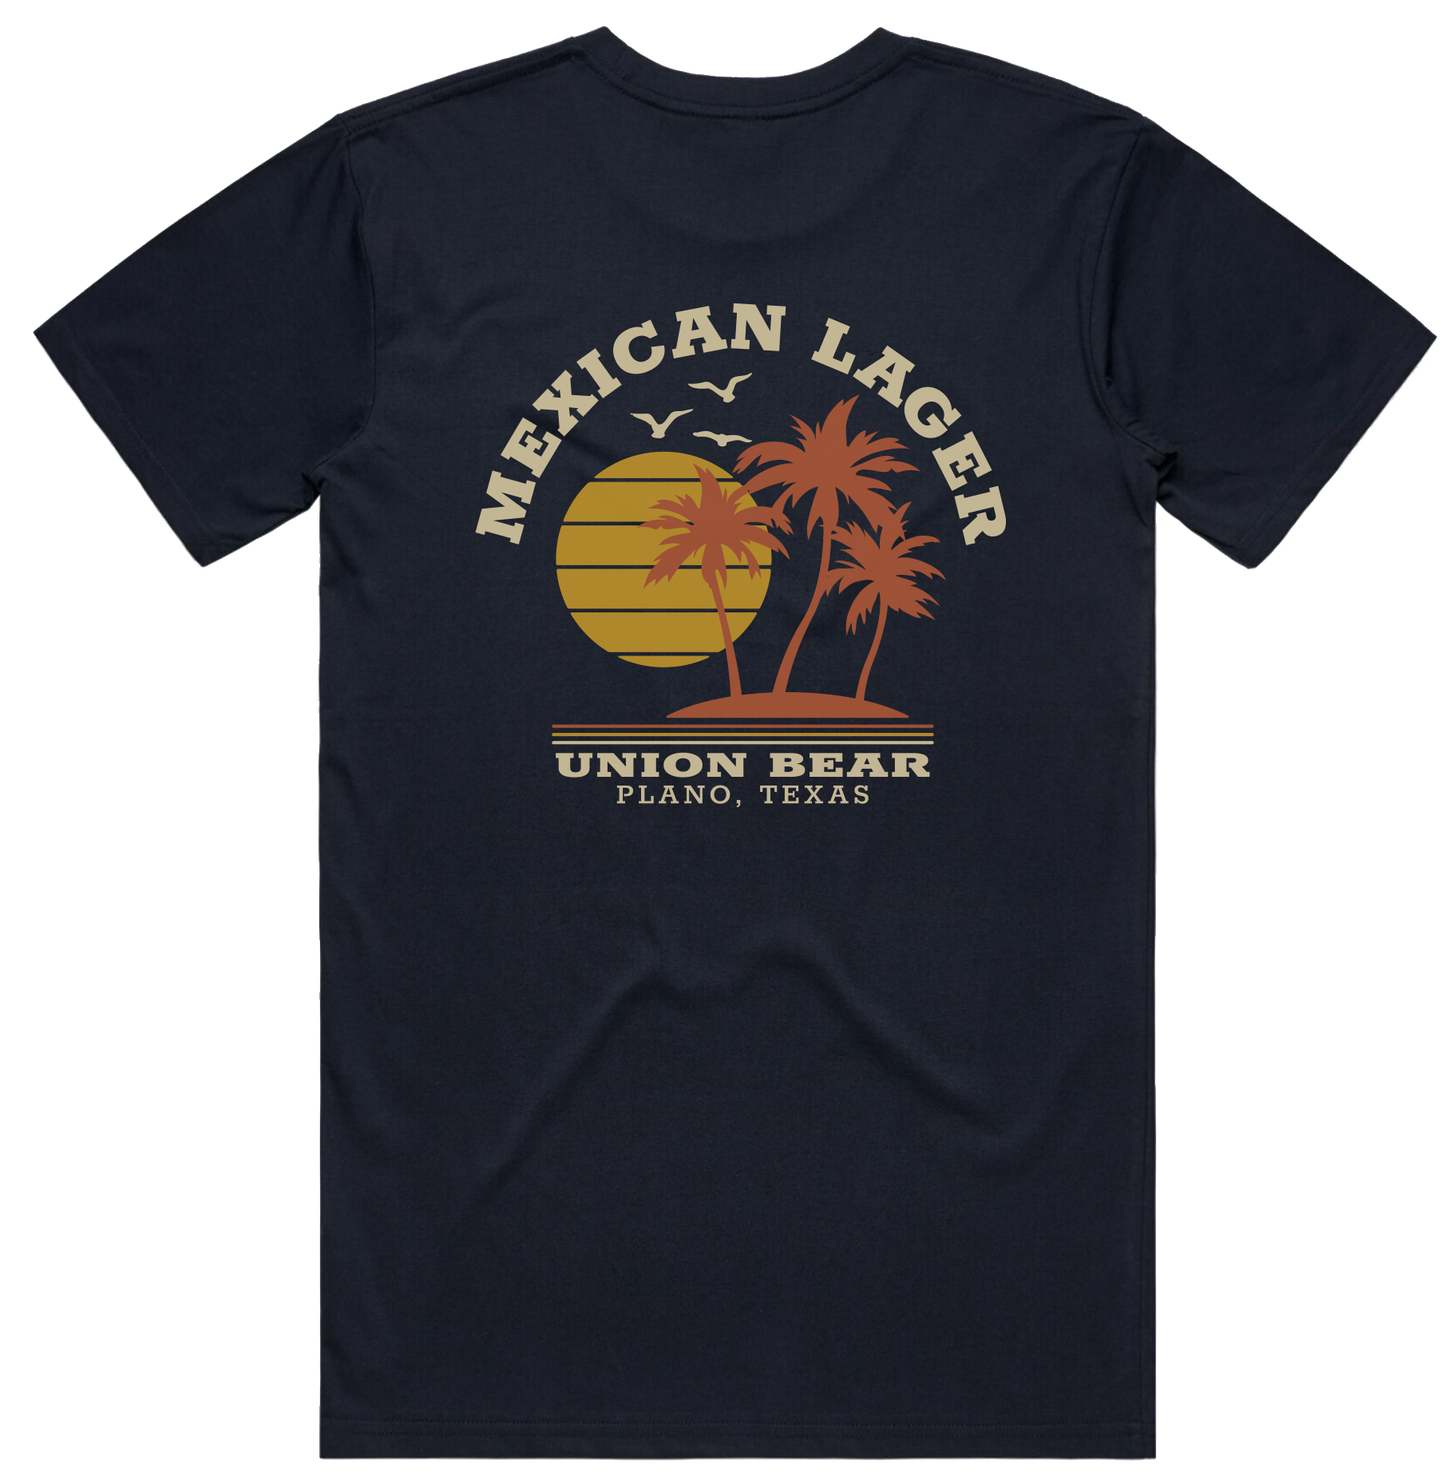 Mexican Lager Tee - Navy